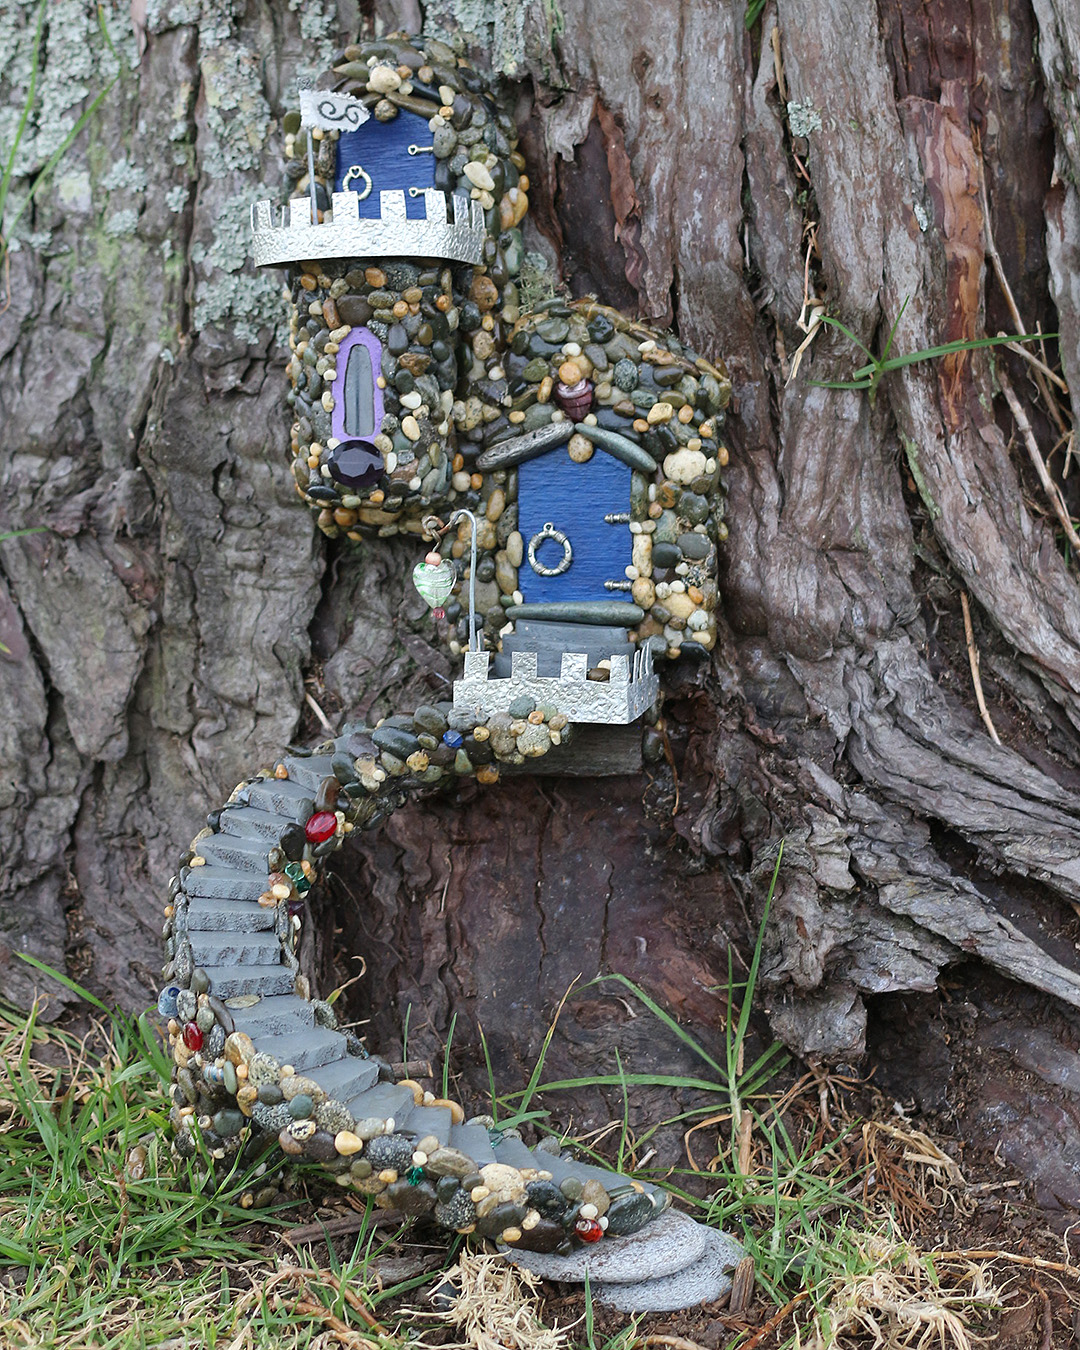 A darling fairy house at Hobsonville point.